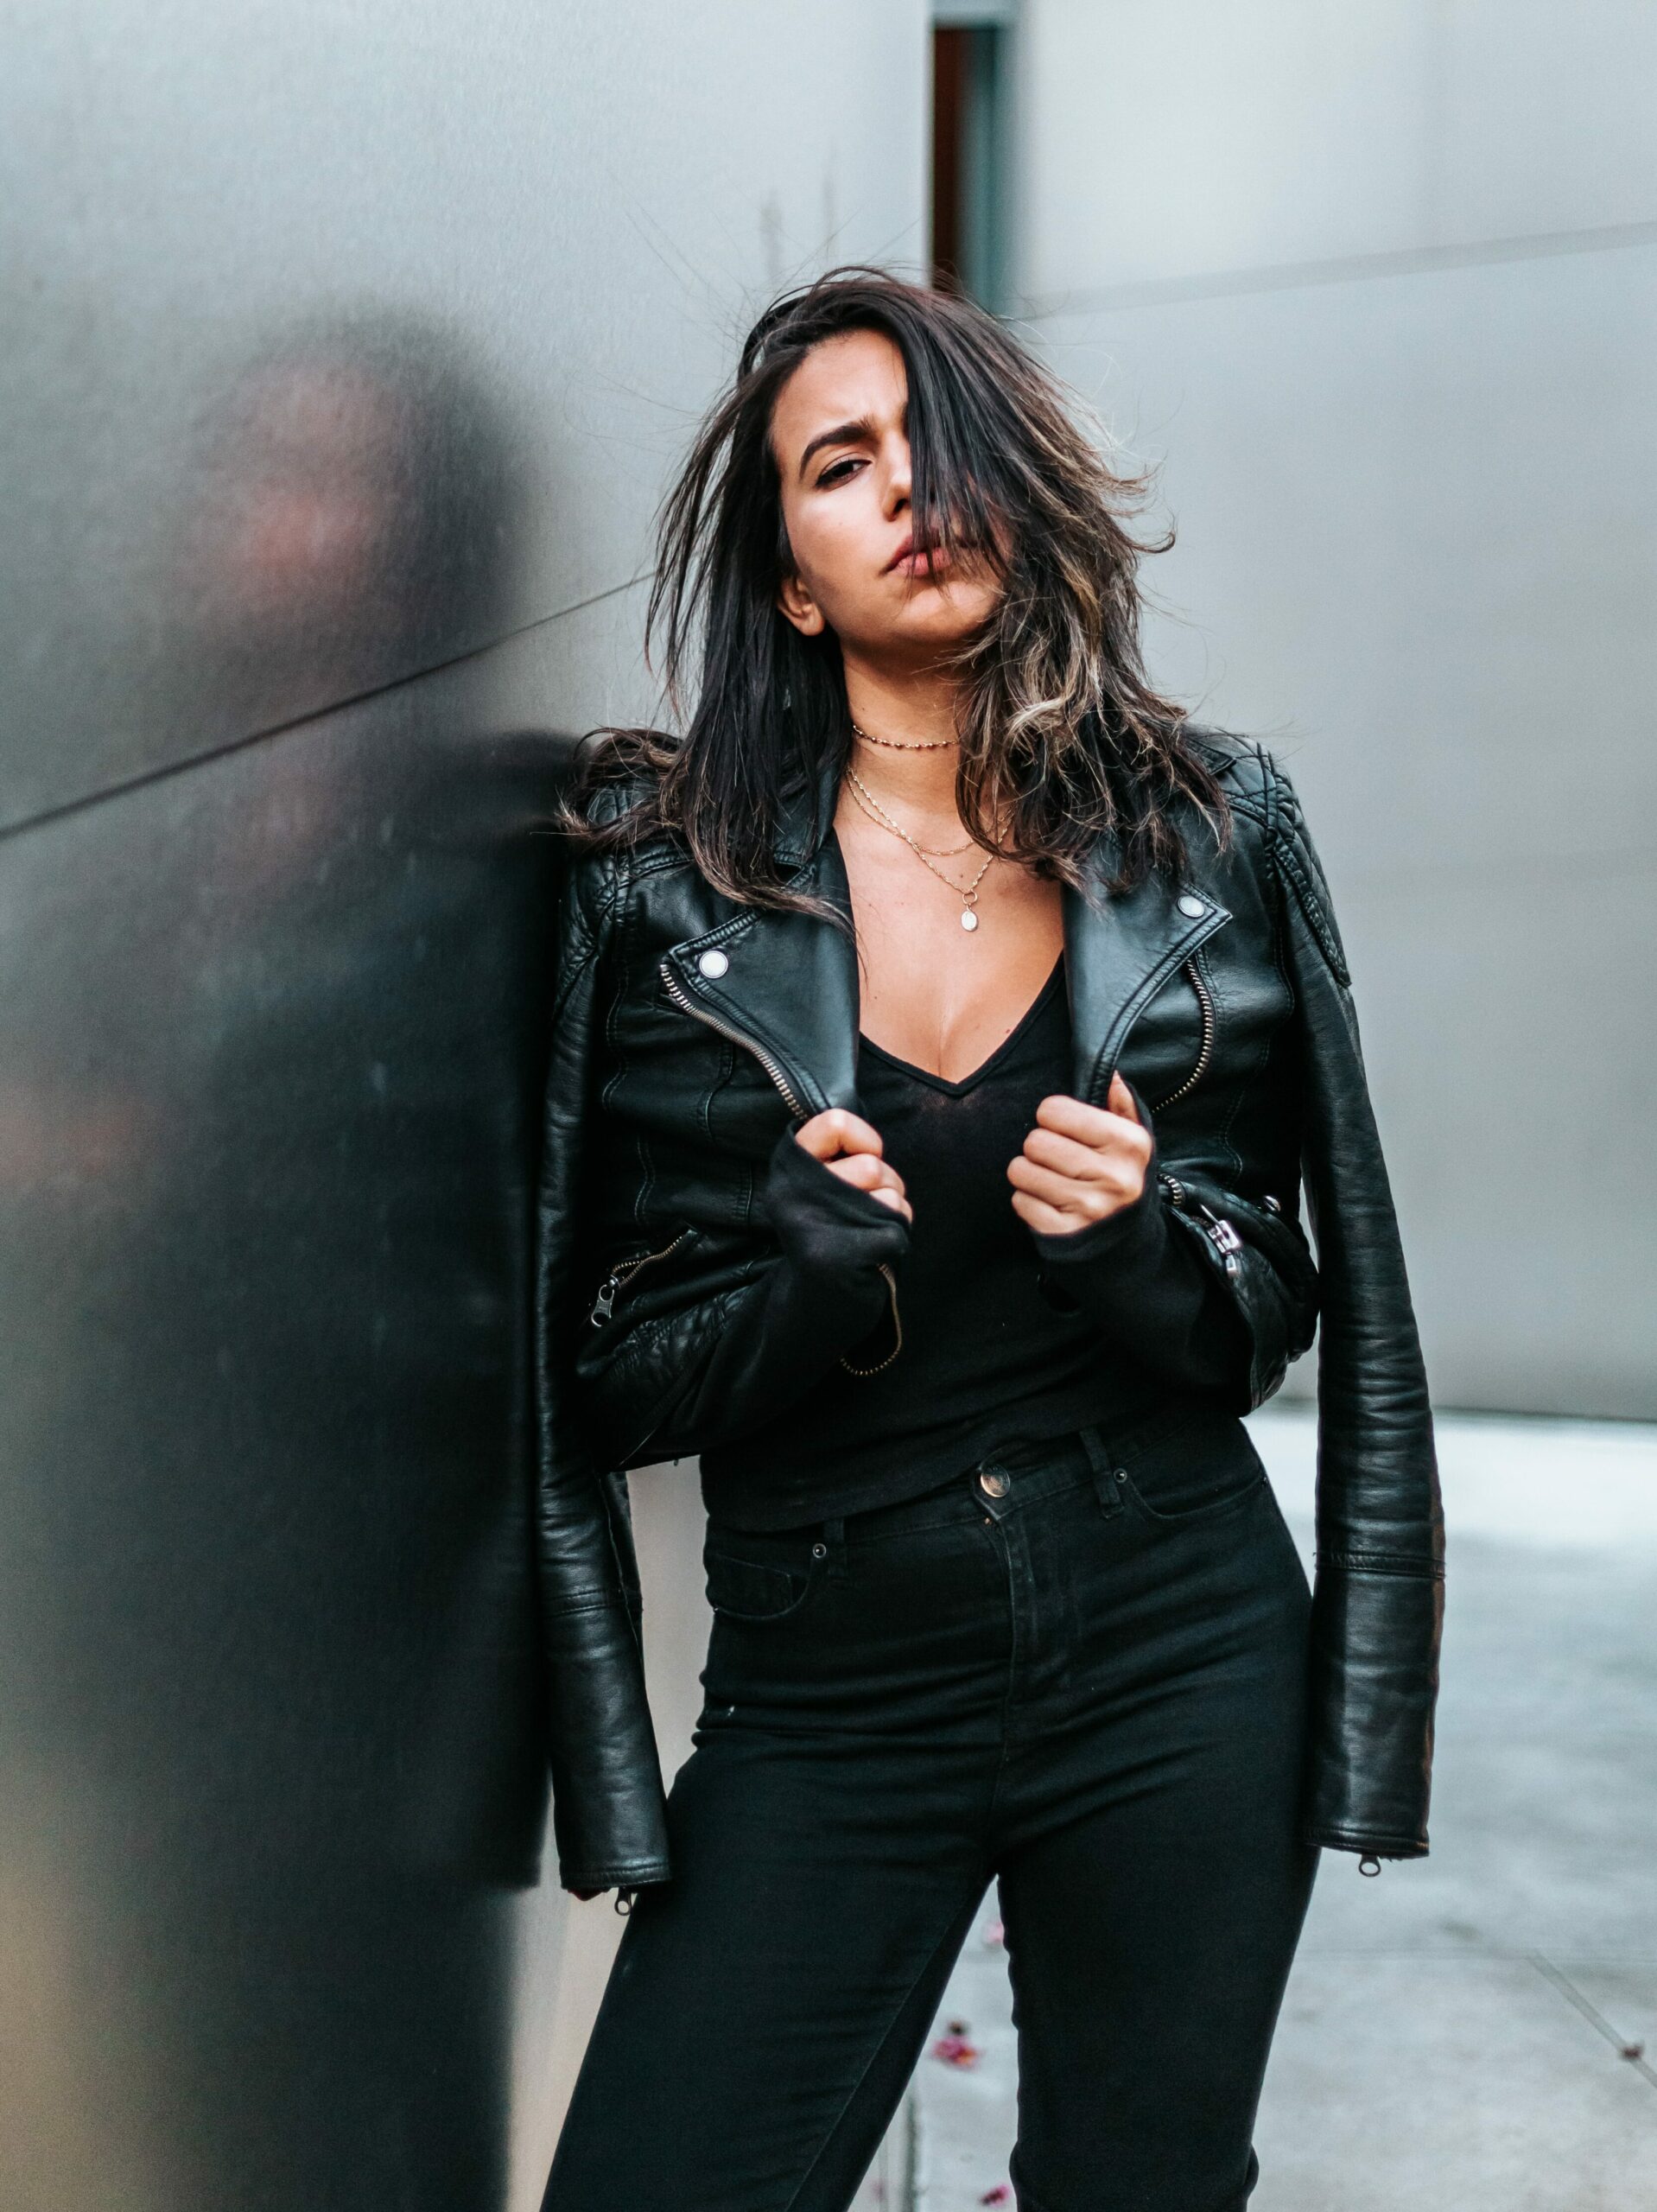 26 Leather Jacket Outfits – How to Wear a Leather Jacket | ClothedUp